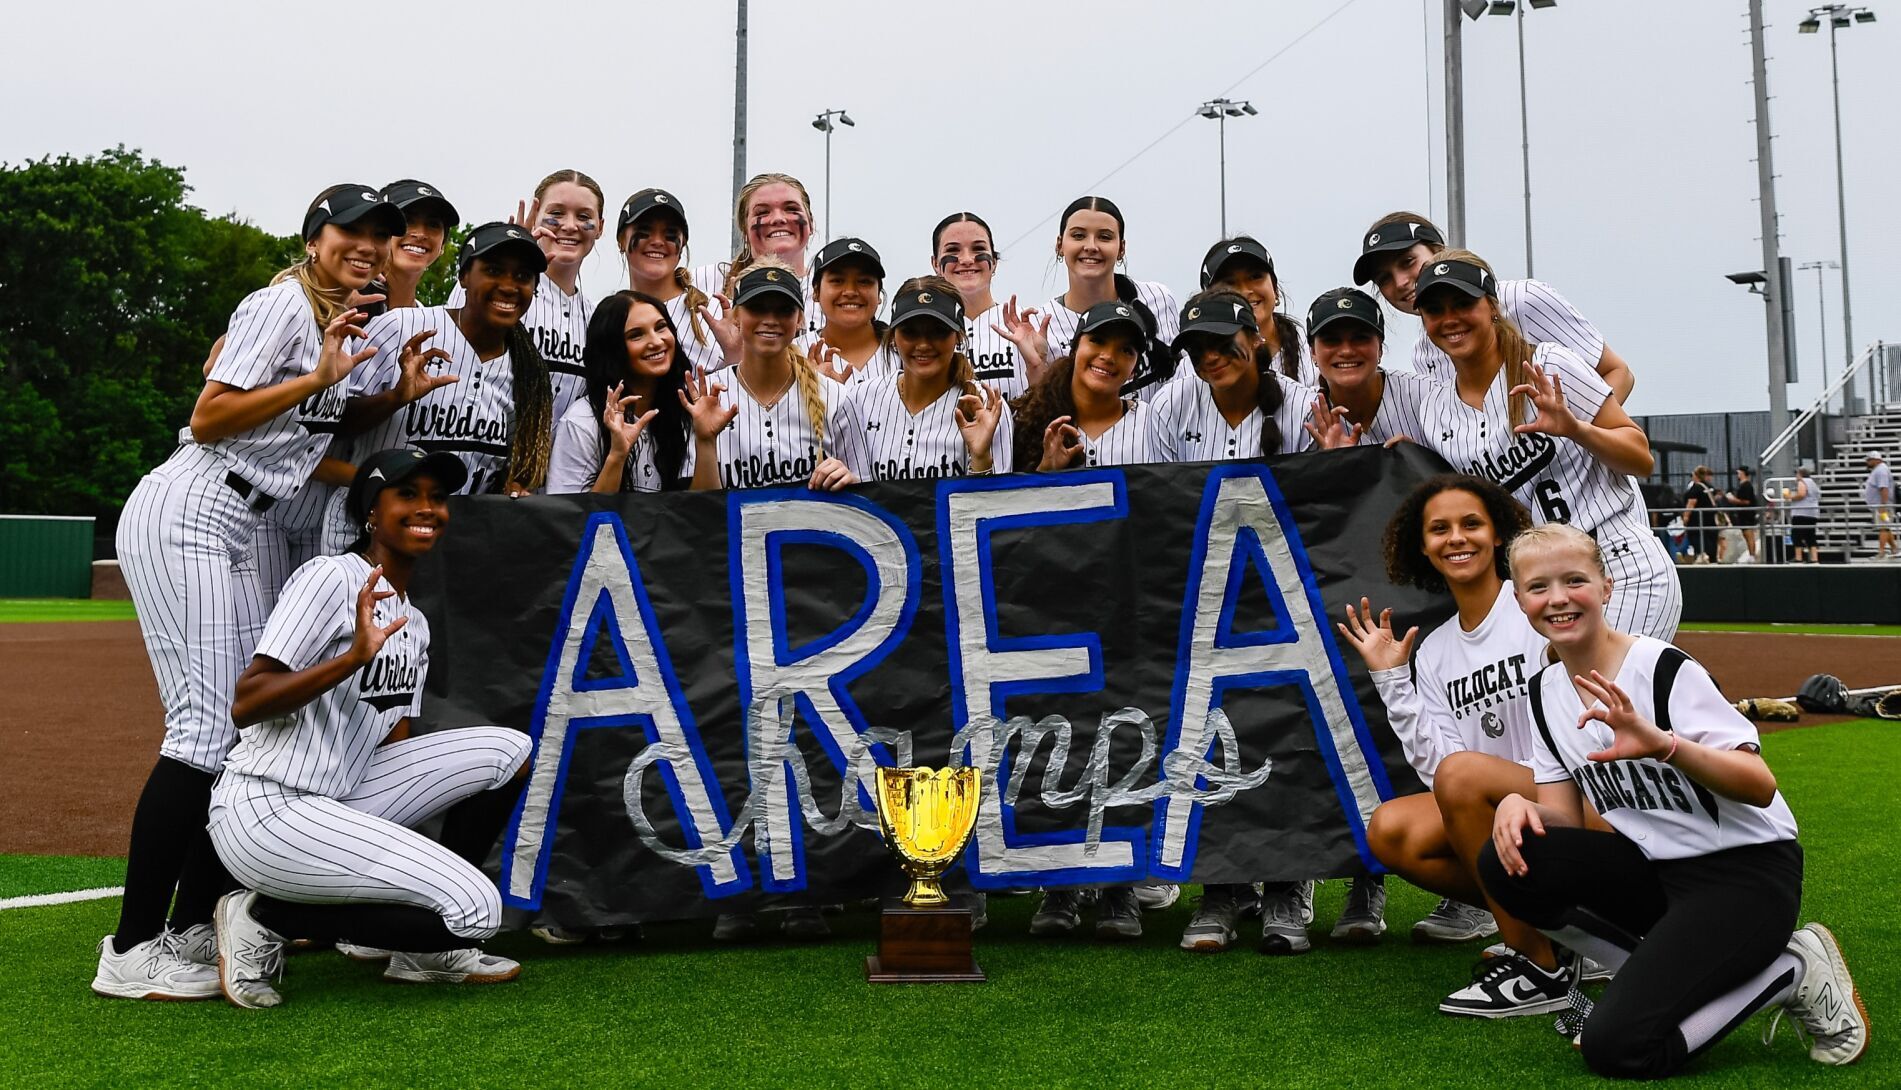 Denton Softball Teams Dominate Playoffs with Undefeated Streaks & Top Rankings